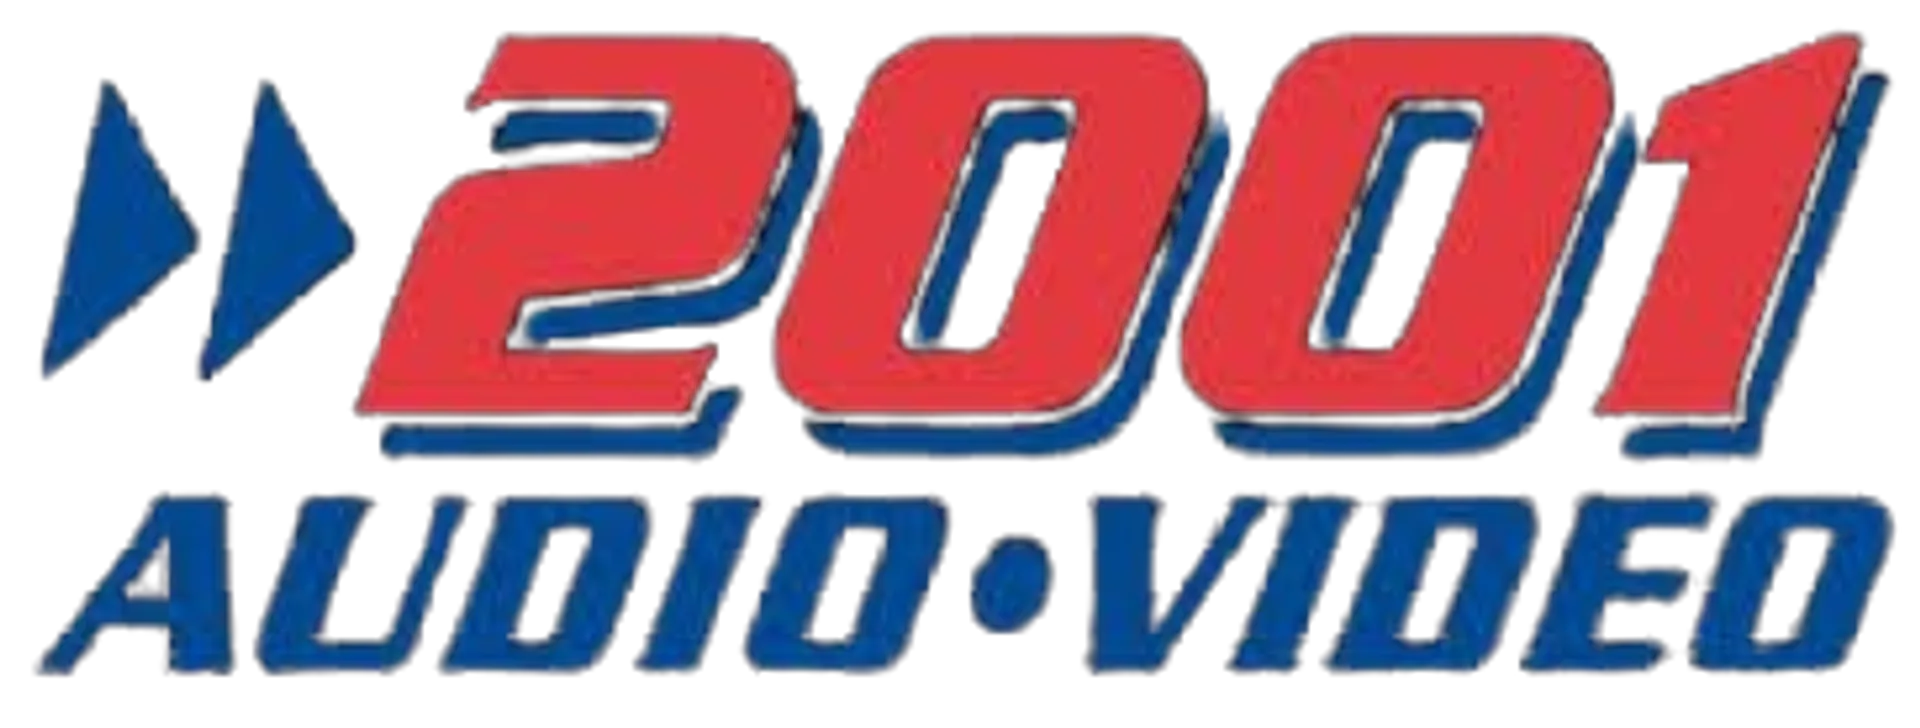 2001 AUDIO VIDEO logo of current flyer